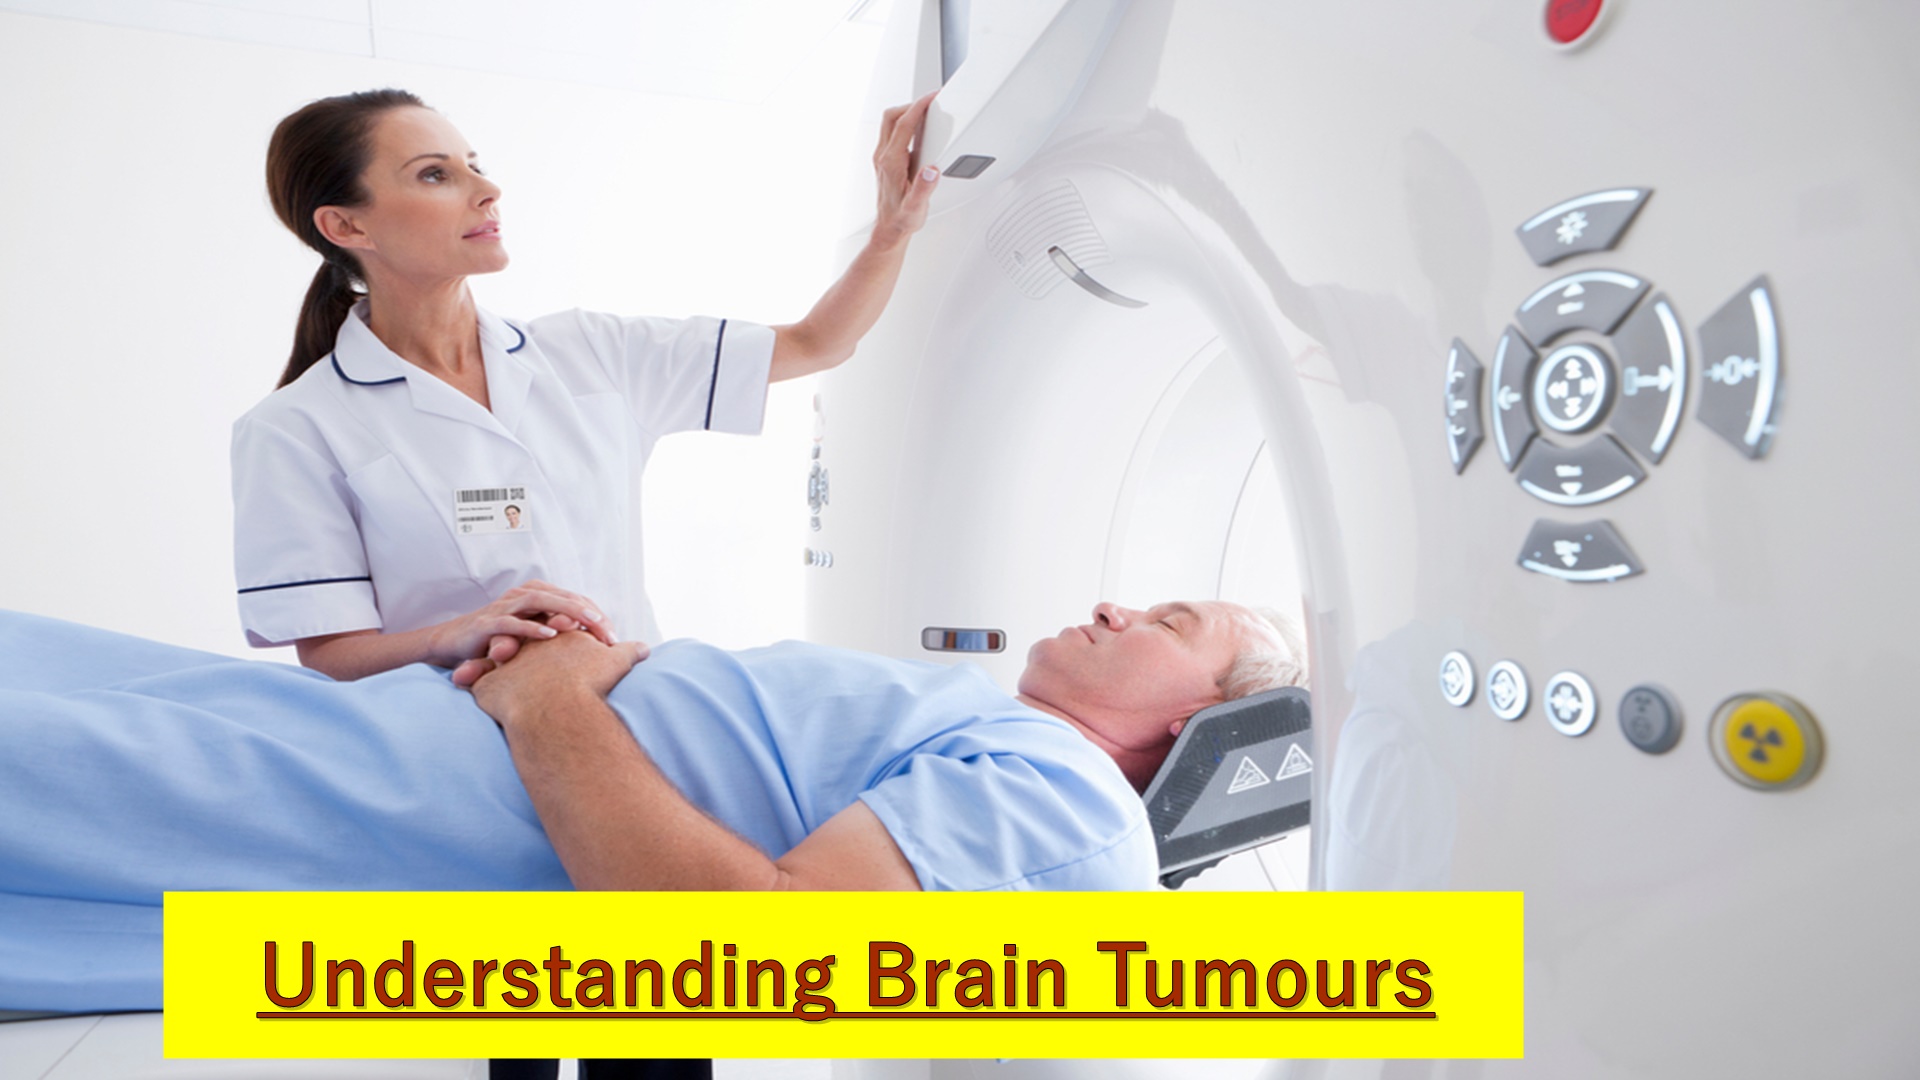 Brain Tumours: Causes, Symptoms, Treatment Options and the Role of CT Scan Machines